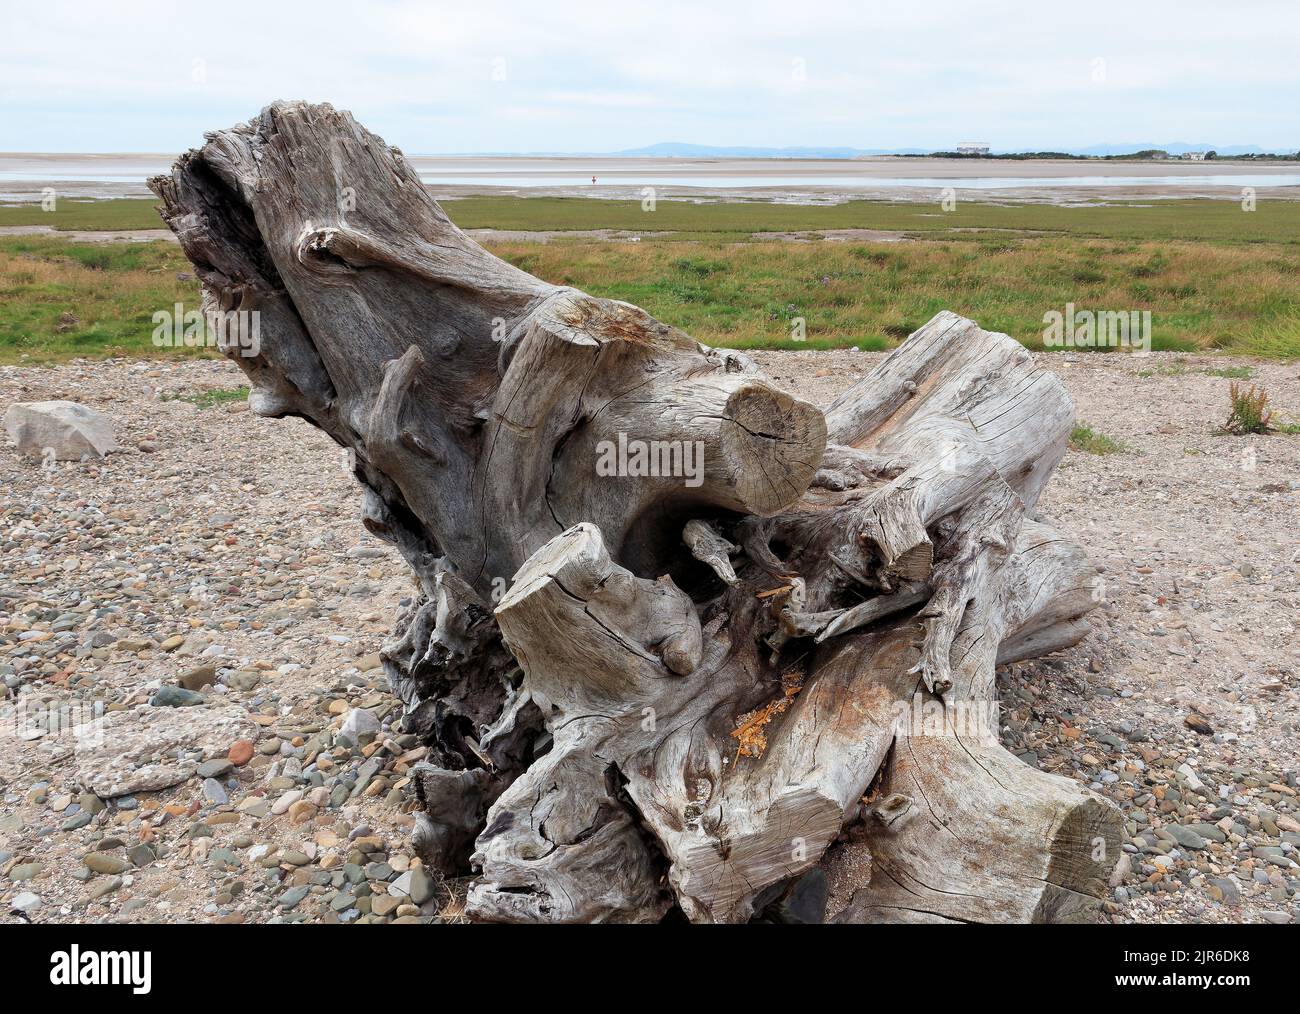 Driftwood with a sculpted appearance suggesting life form Stock Photo